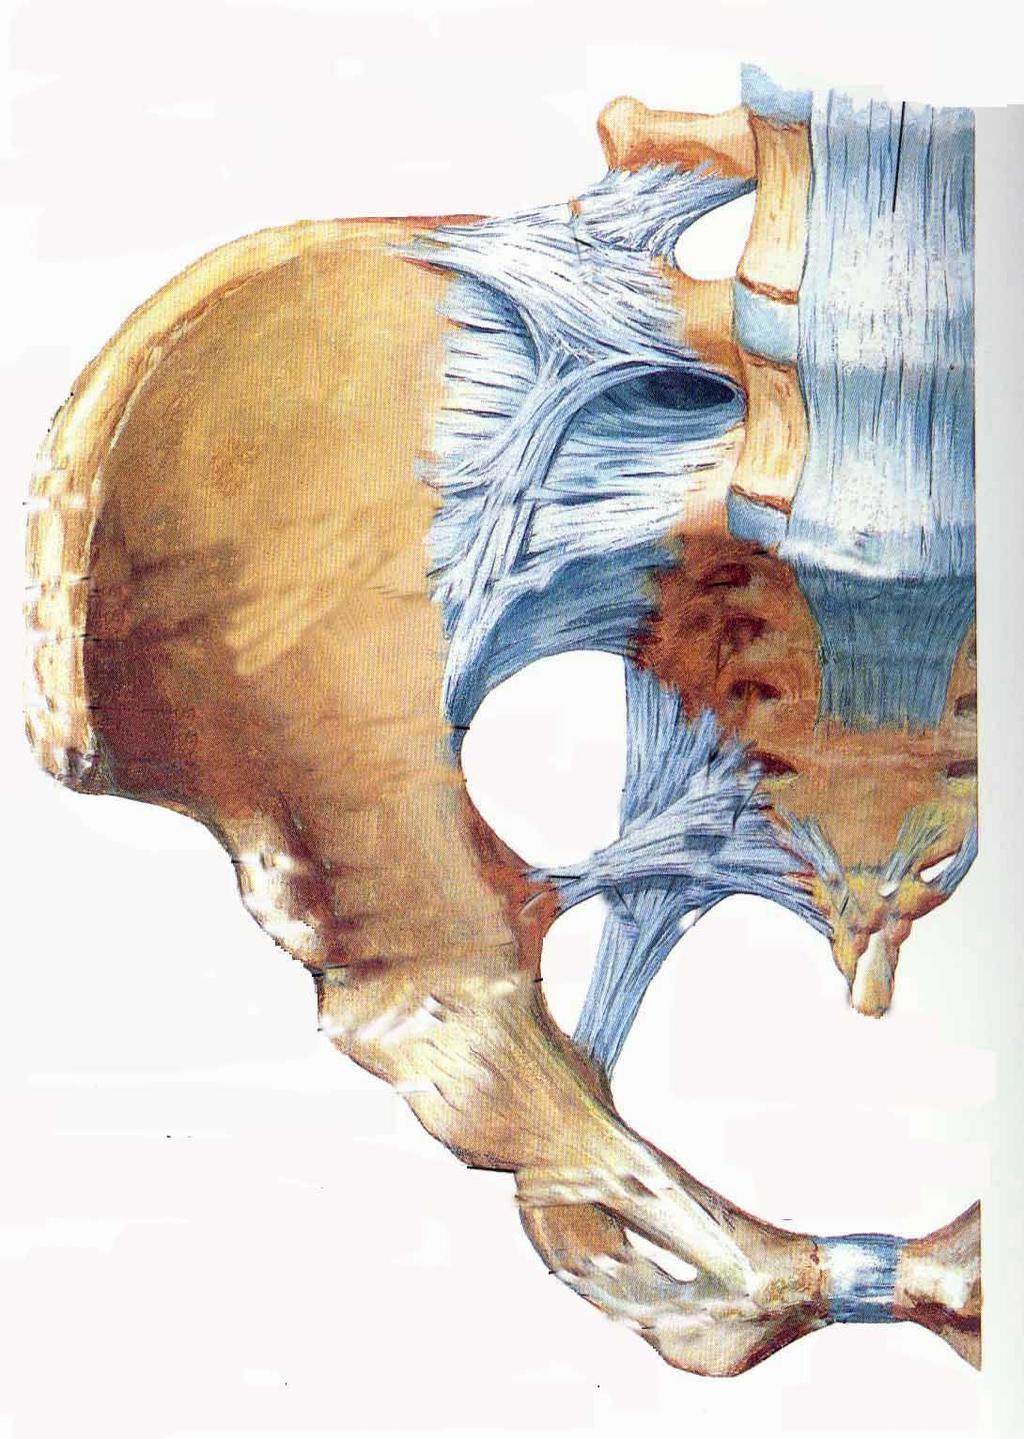 Sacrospinous Ligament Fixation Objective success 73-97% Various definitions of success Sites of